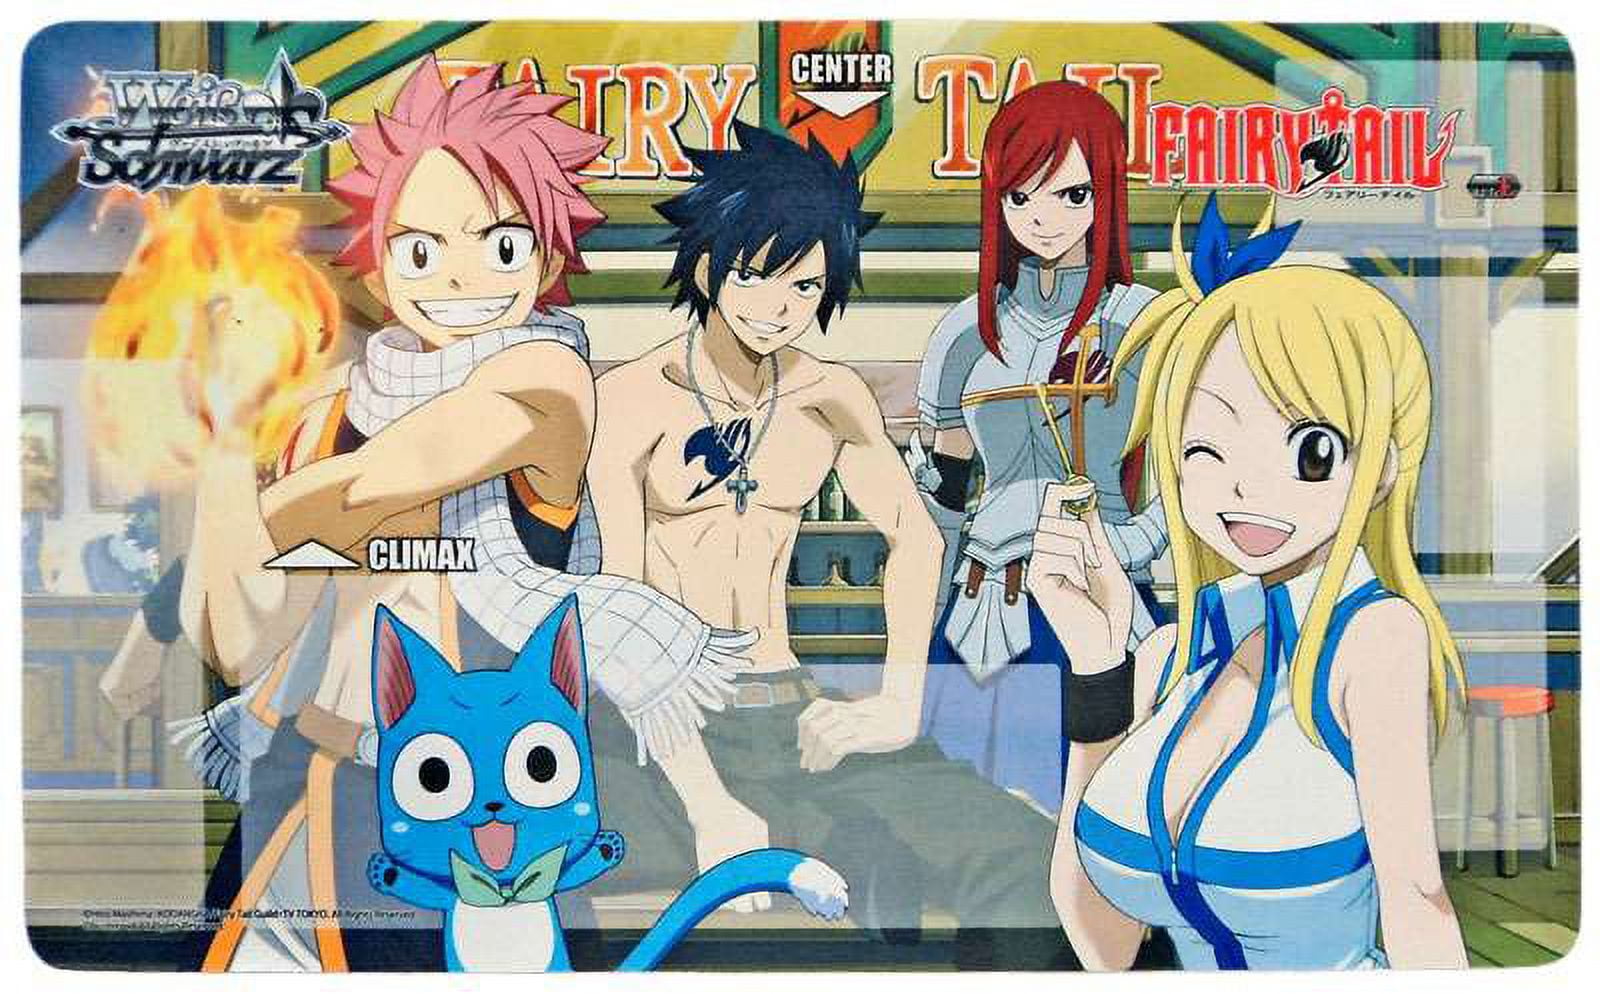 Weiss Schwarz/Fairy Tail Extra Pack]Natsu, Dragon Force FT/SE10-26 R